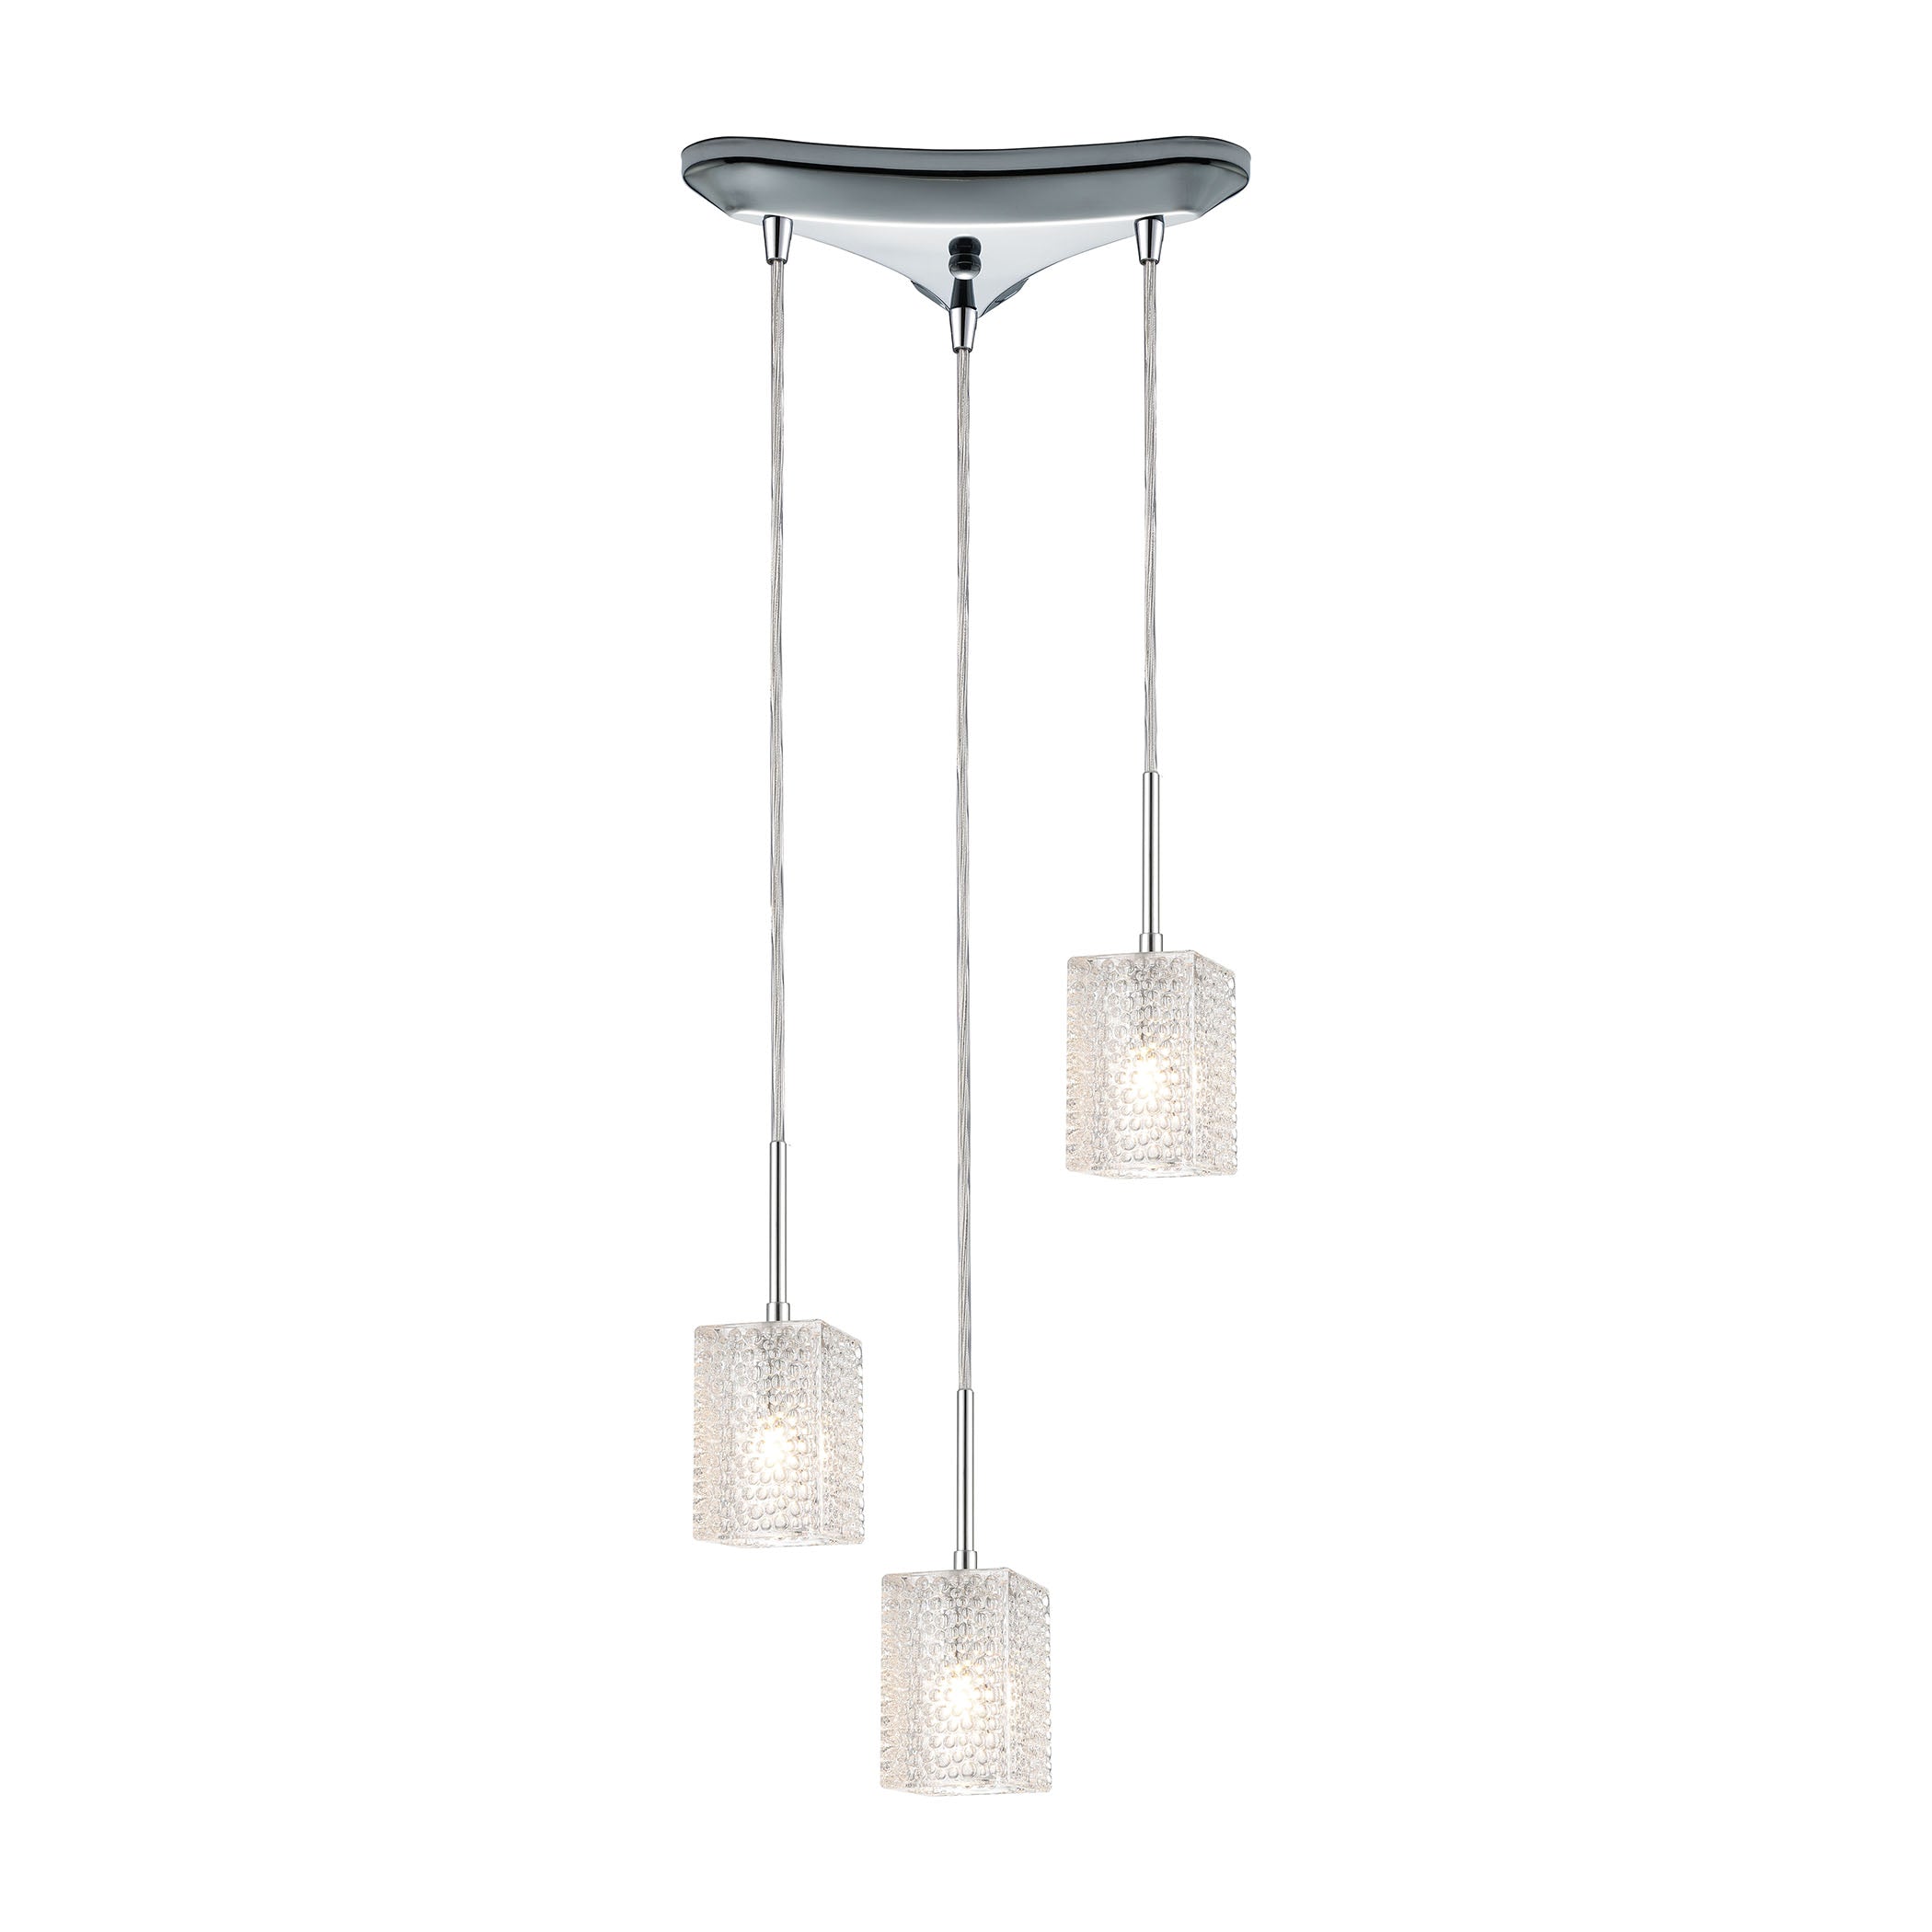 ELK Lighting 17434/3 Ezra 3-Light Triangular Mini Pendant Fixture in Polished Chrome with Textured Clear Crystal